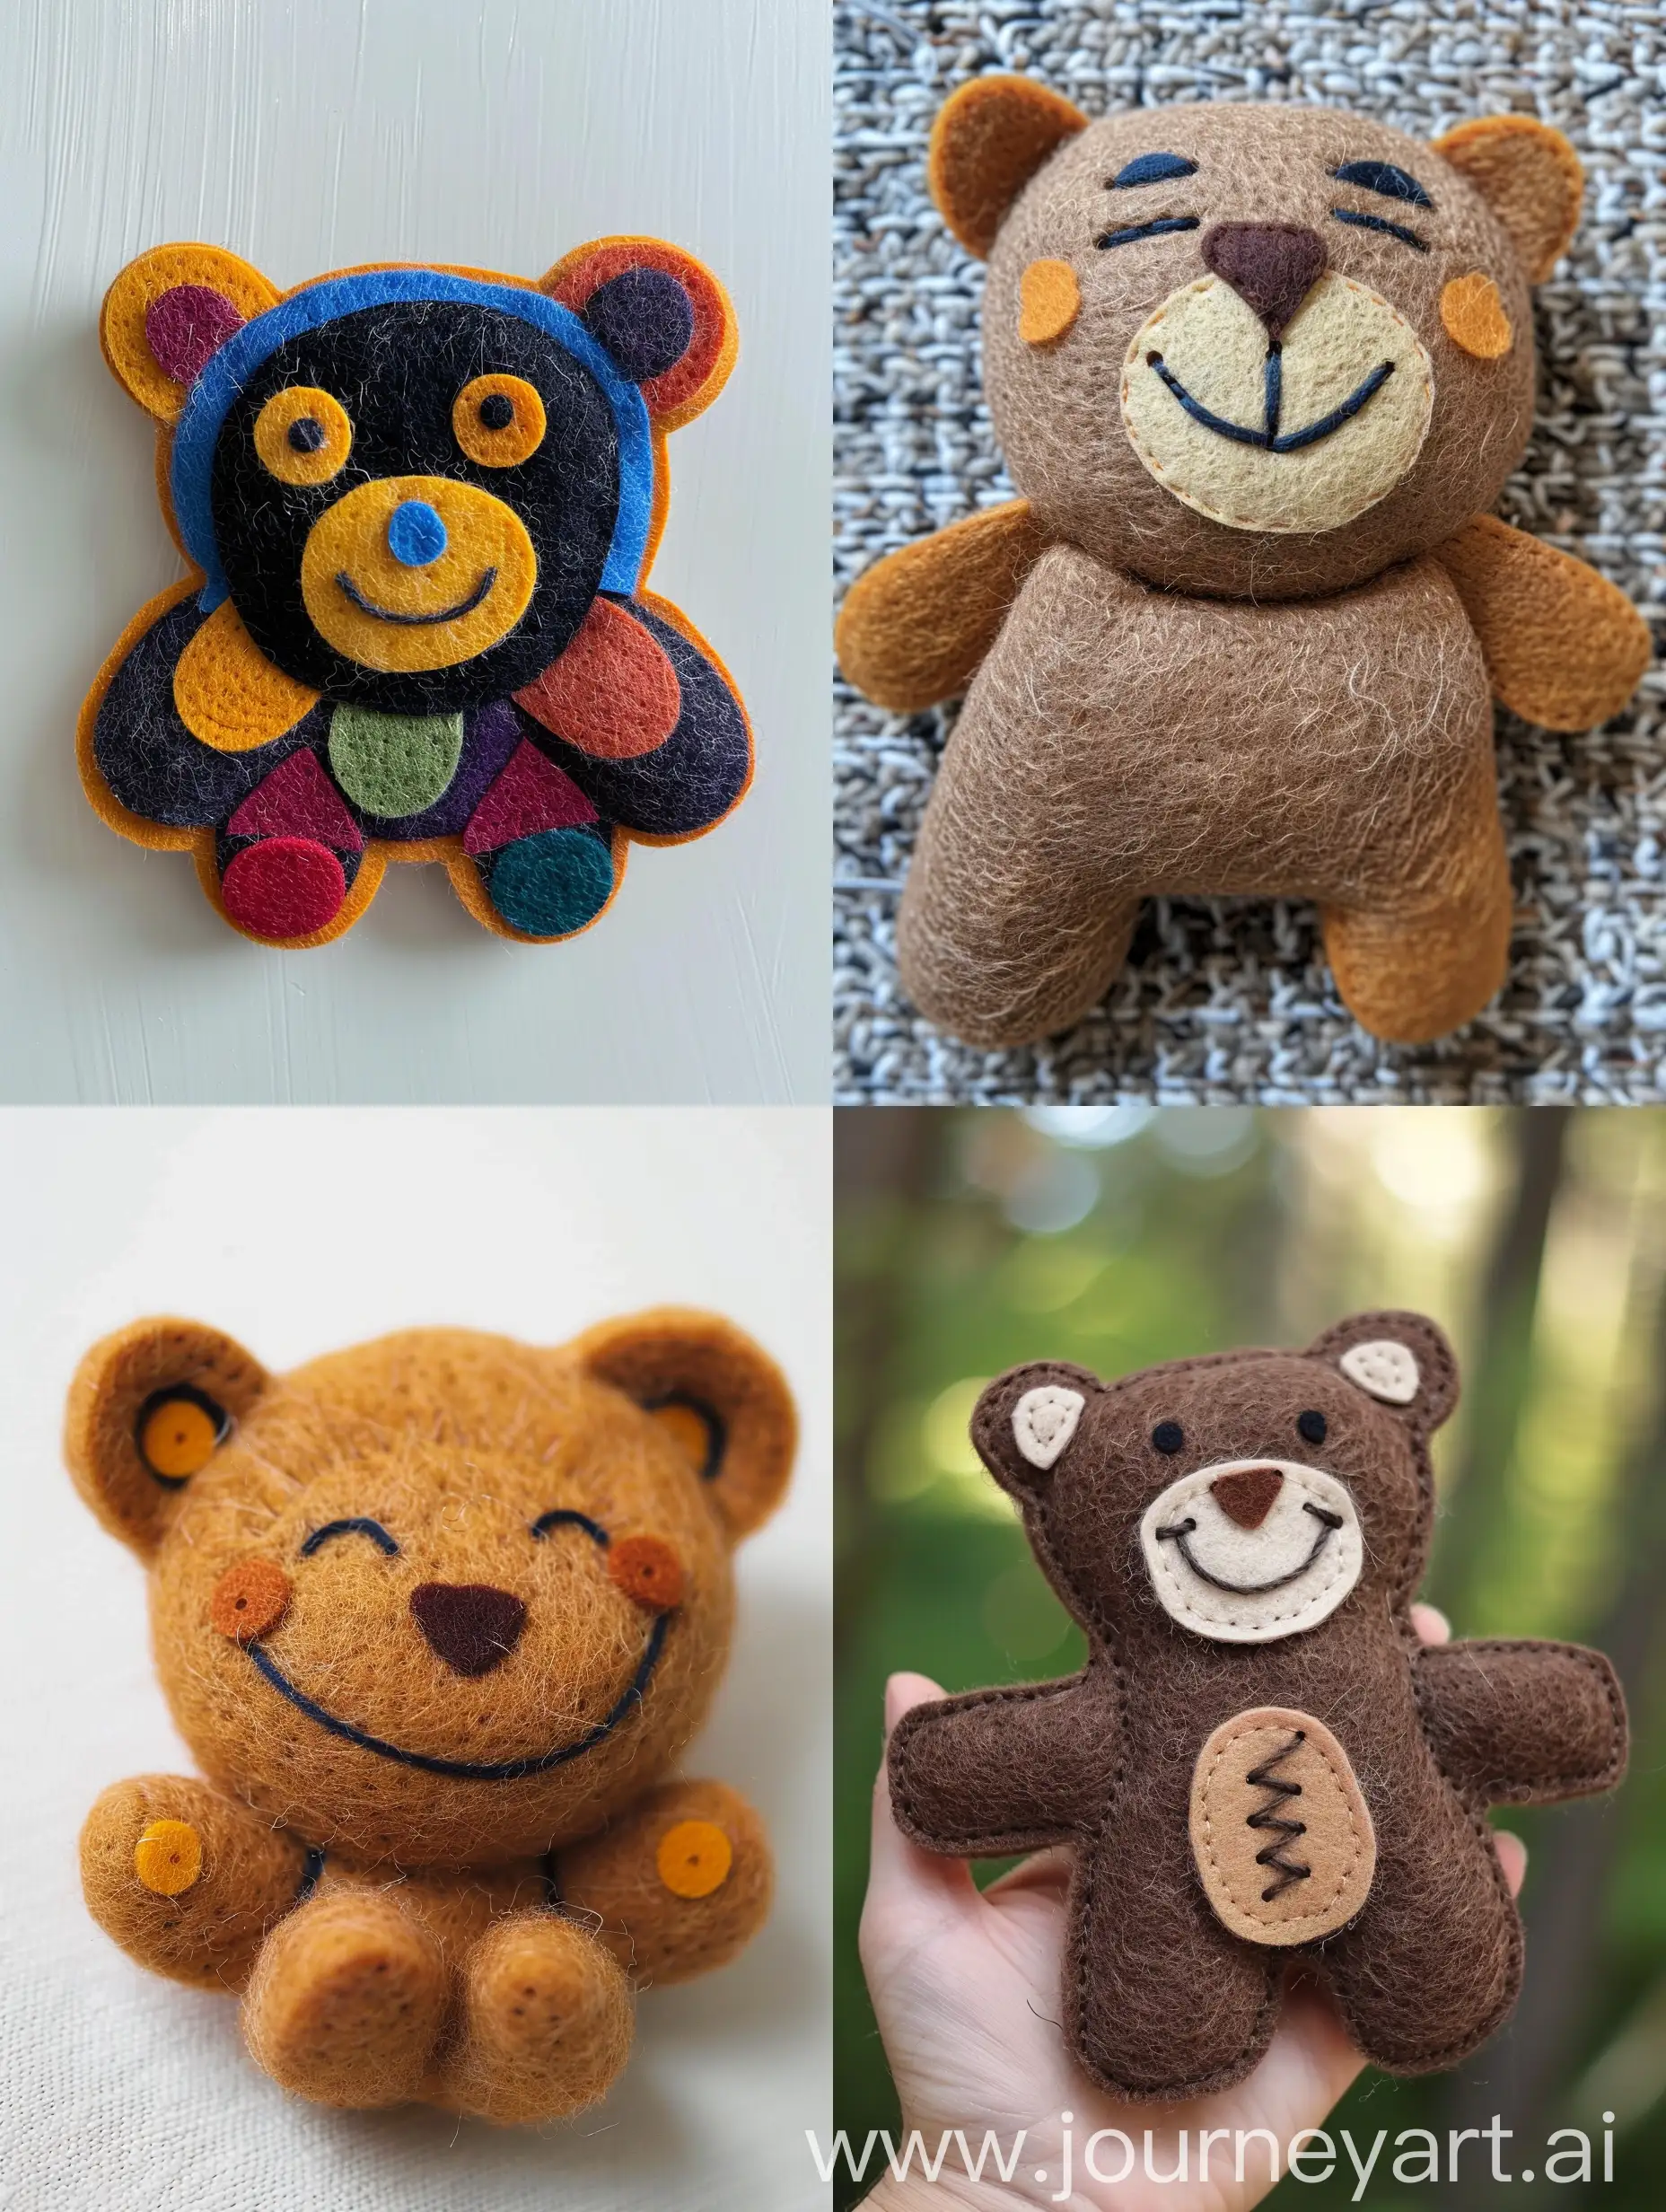 Cheerful-Bear-Crafted-from-Felt-Fabric